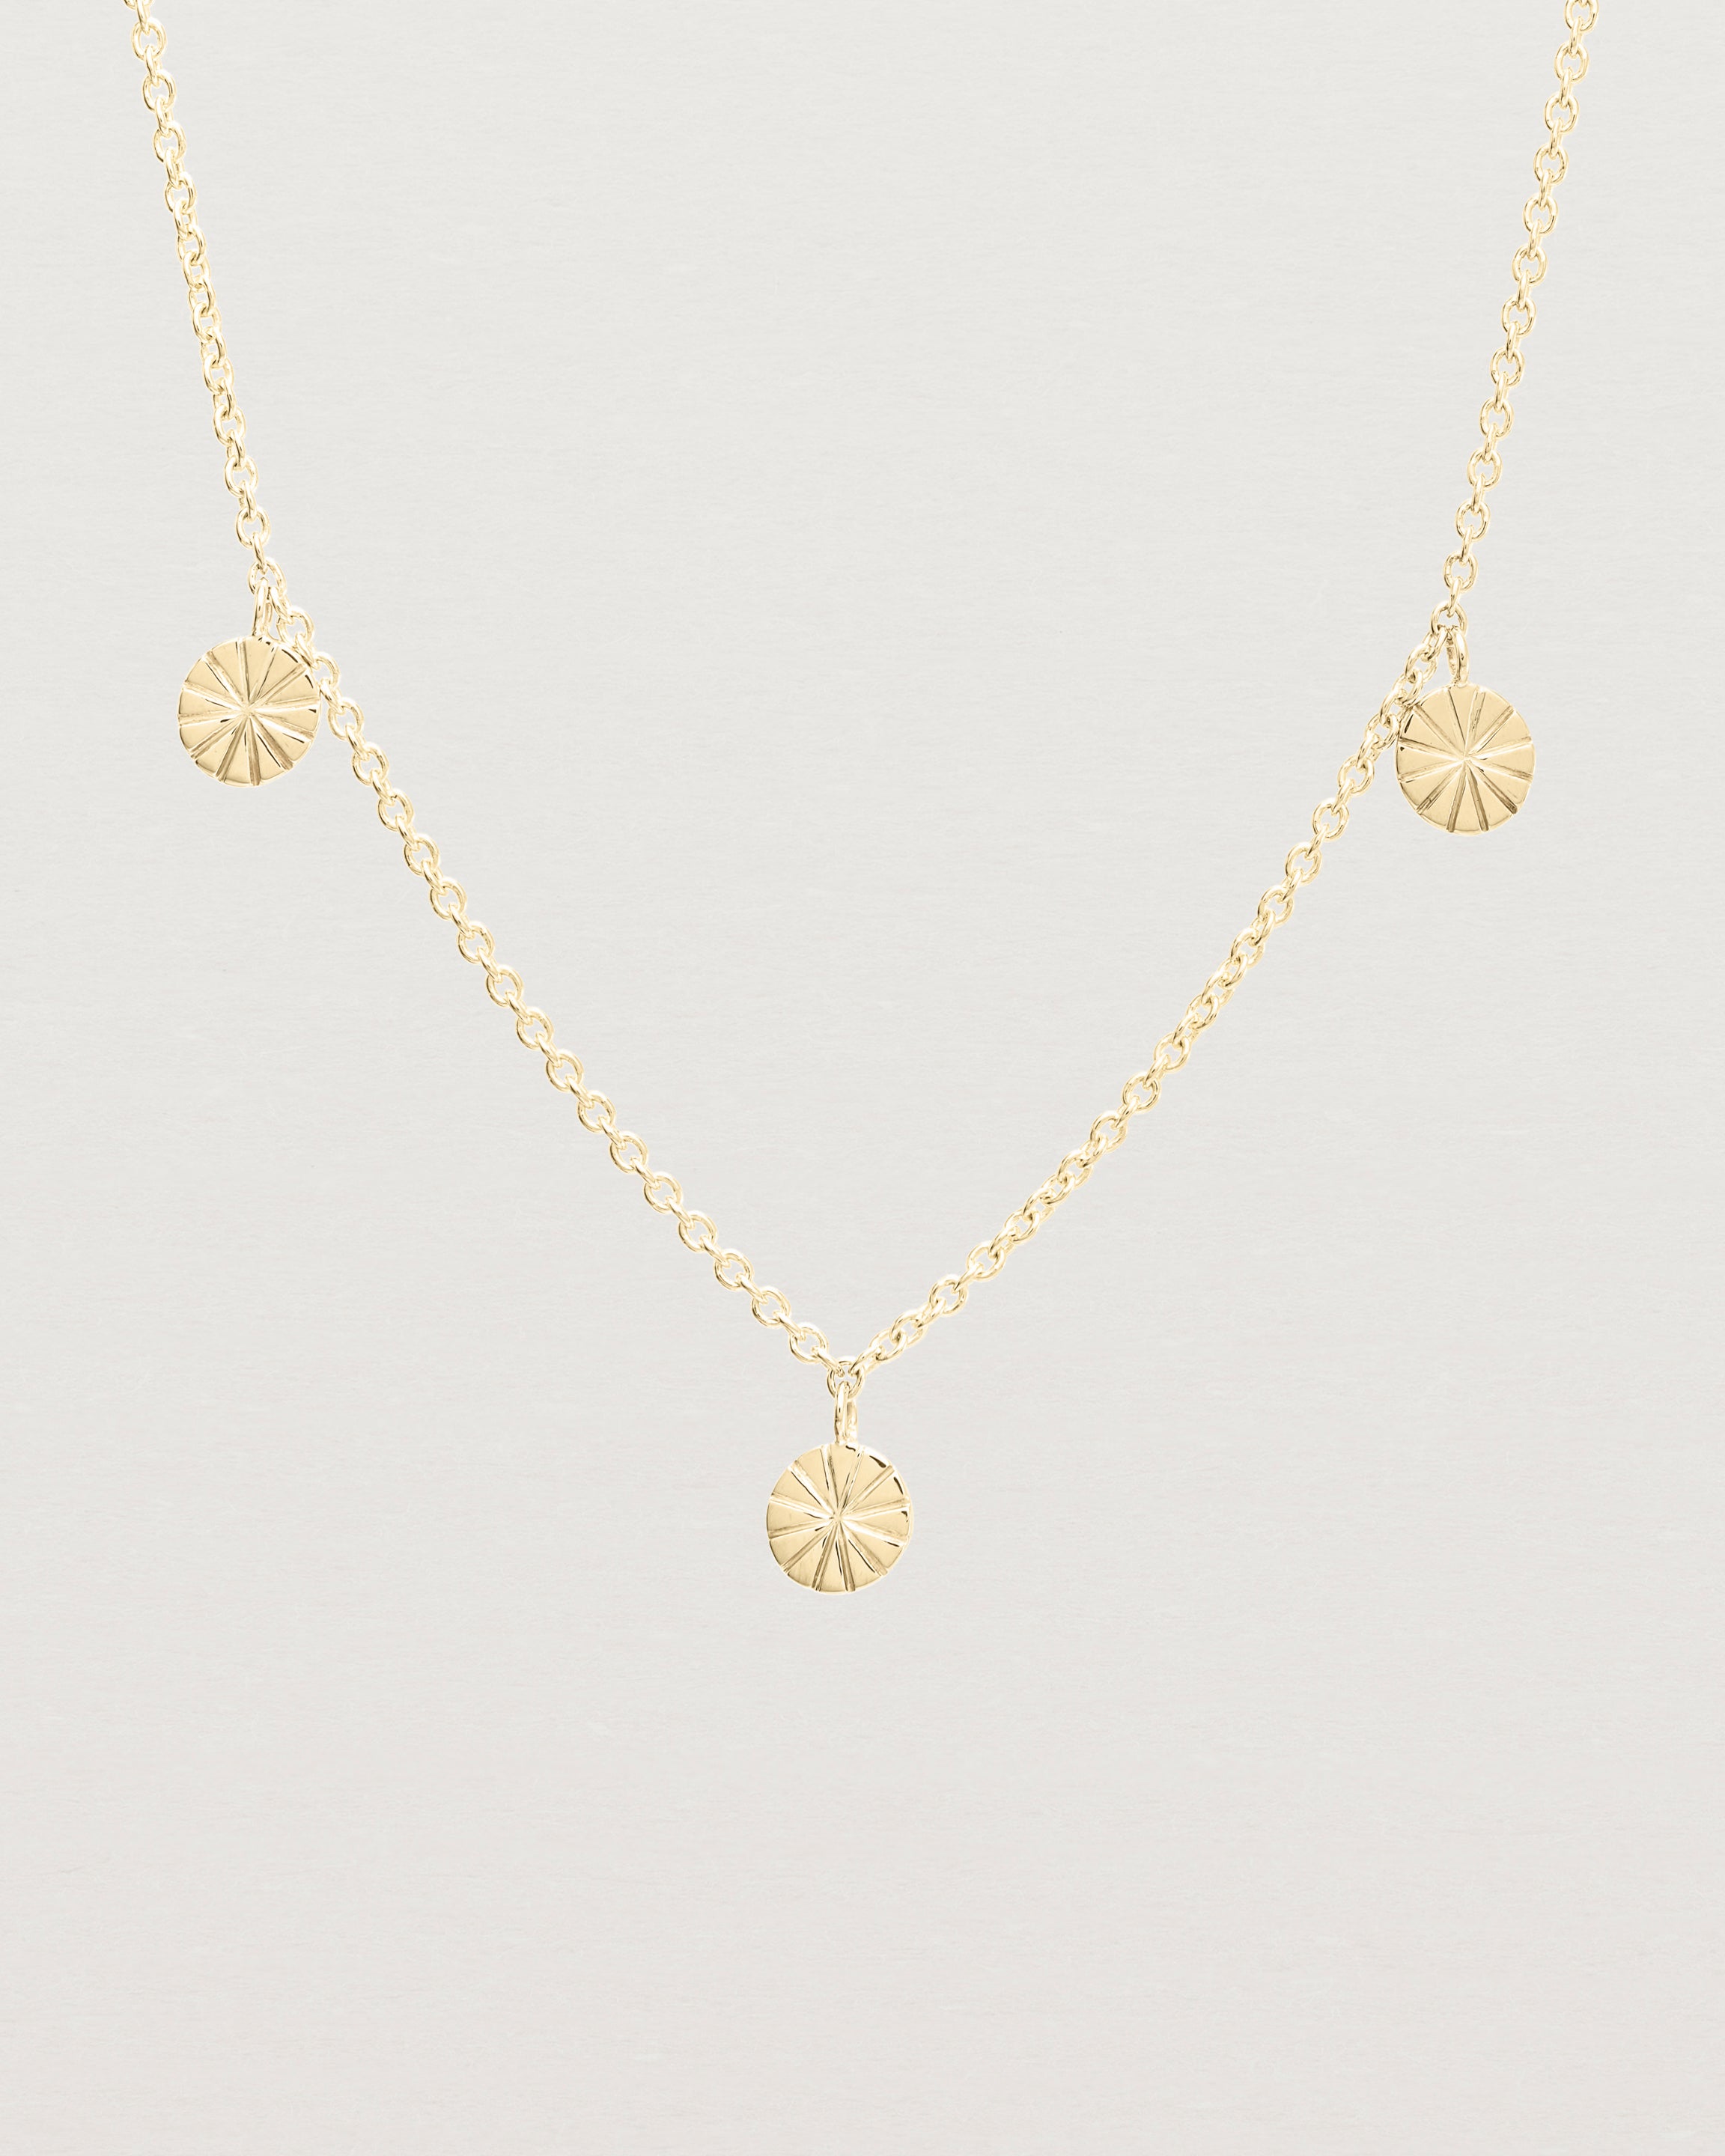 Close up view of the Jia Charm Necklace | Yellow Gold.